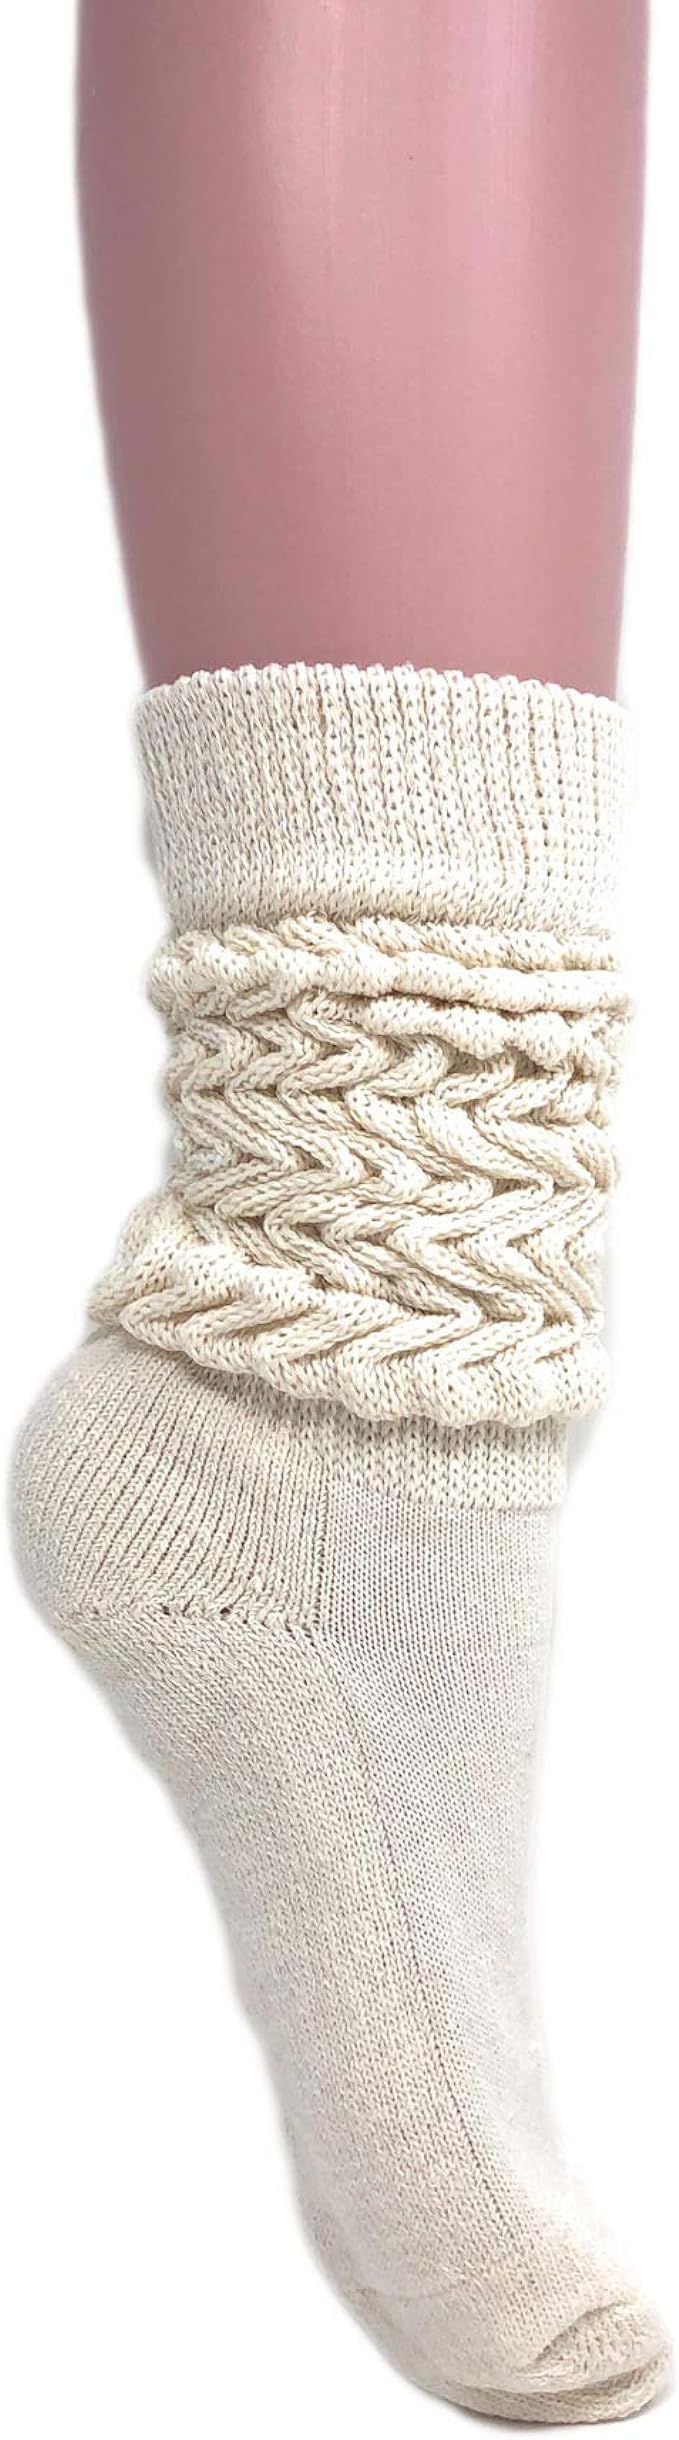 AWS/American Made Slouch Socks Cotton Scrunch Knee High Extra Long and Heavy Socks | Amazon (US)